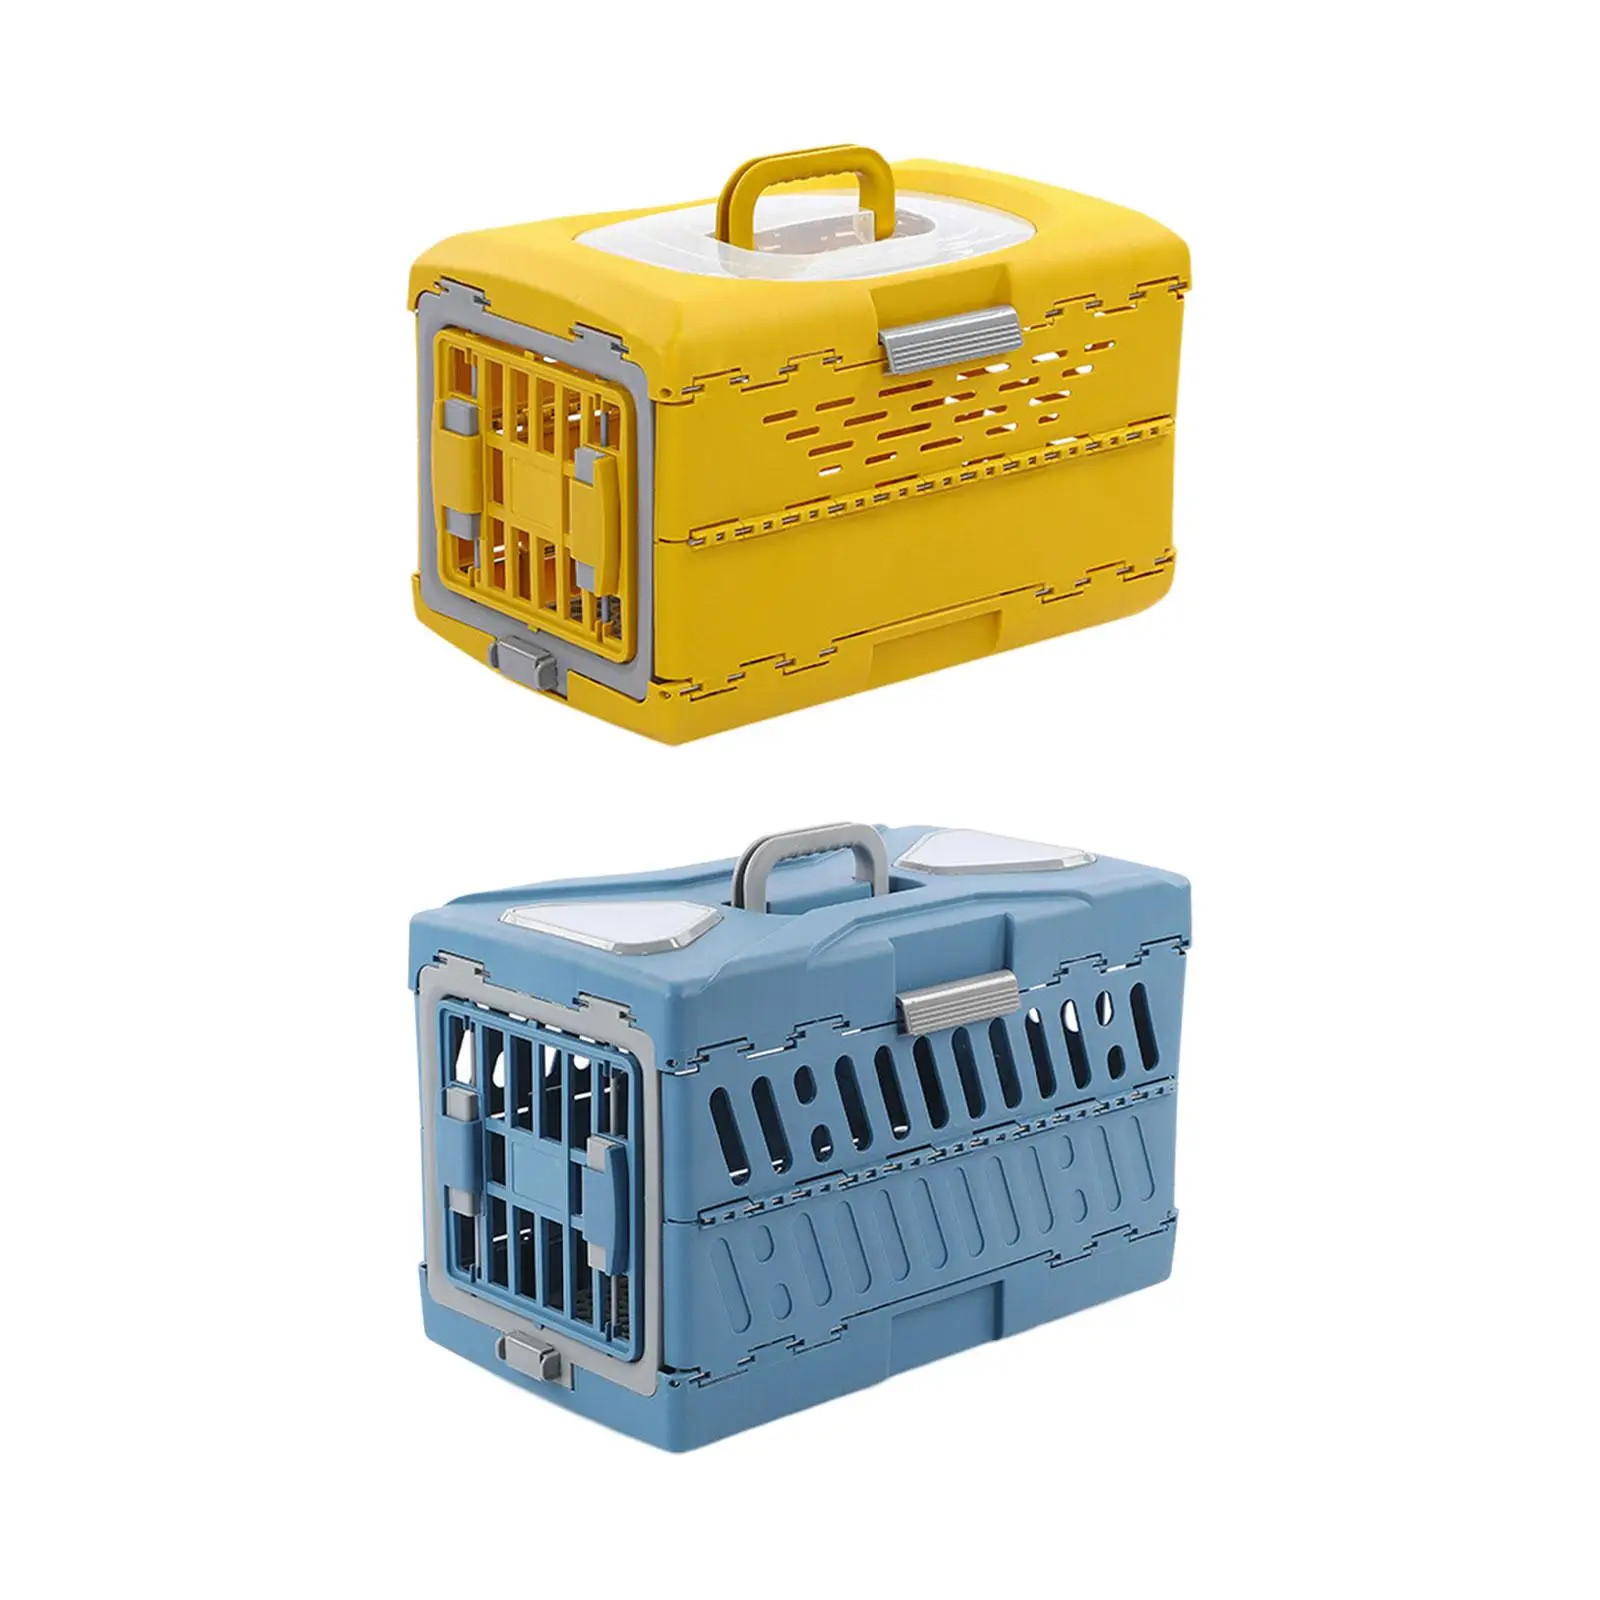 Collapsible Puppy Crate Breathable Foldable Cat Transport Box Travel Cage Pet Carrier for Rabbit Kitten Small Dogs Cat Puppy